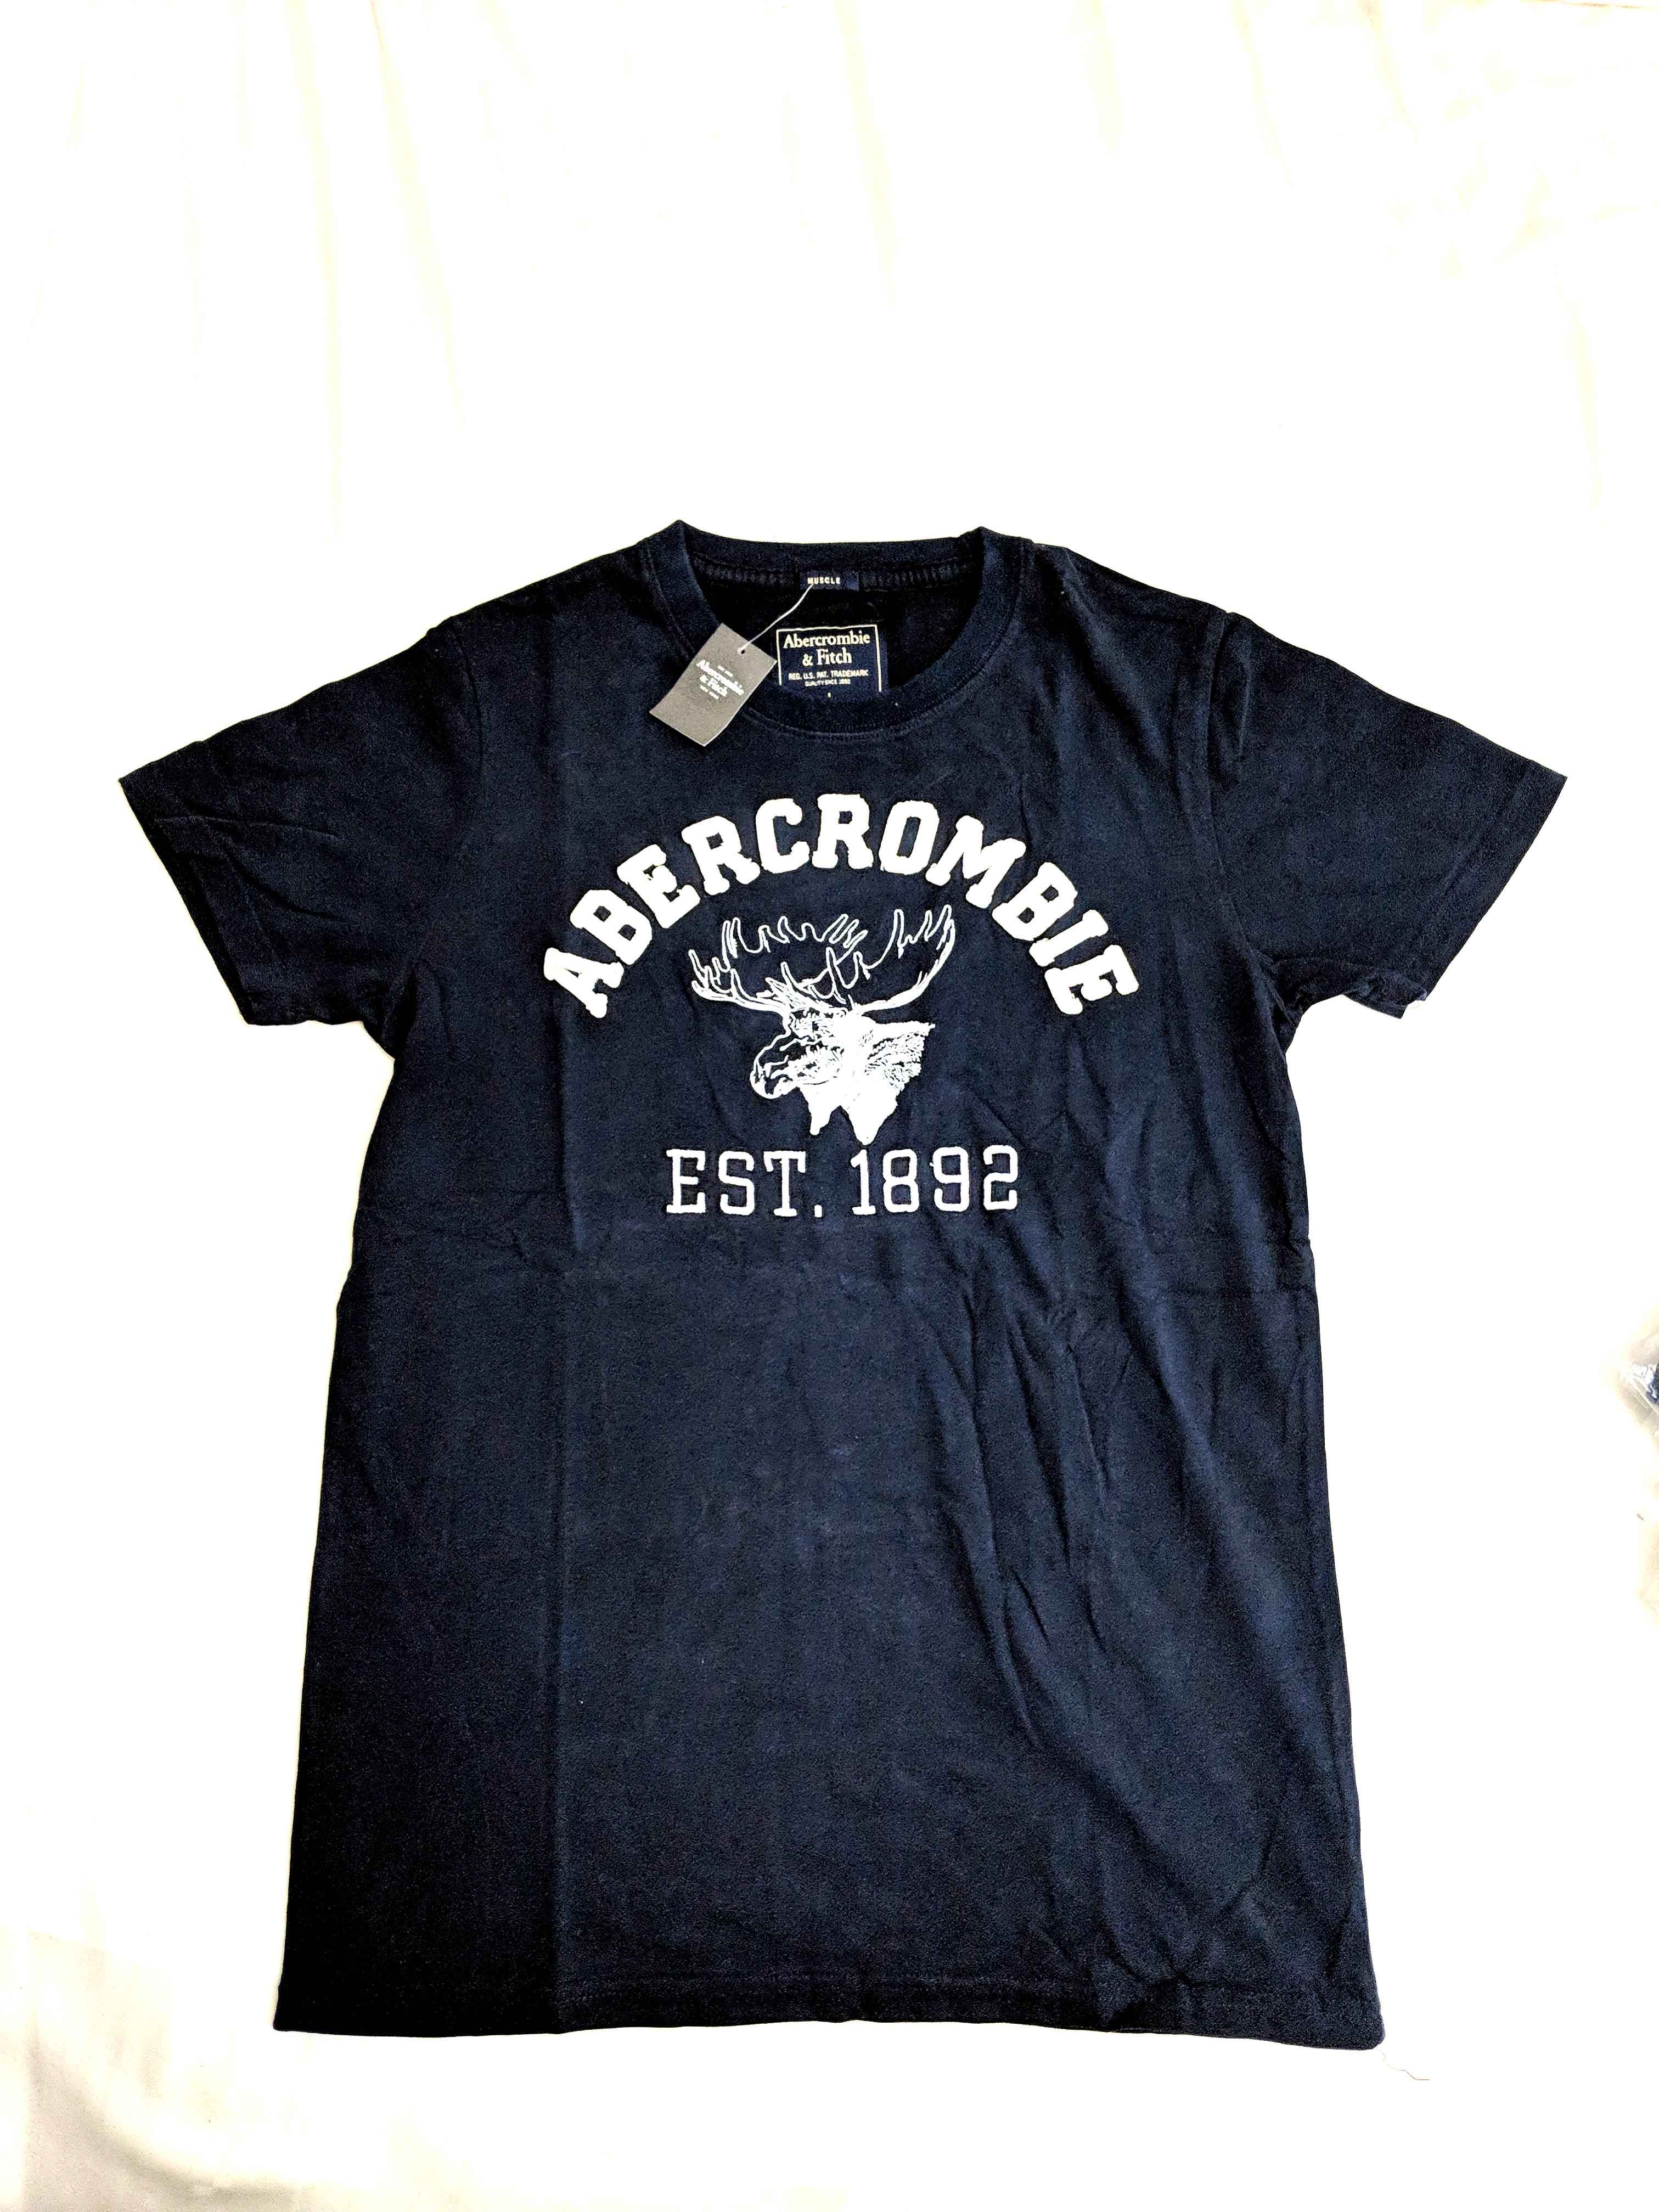 abercrombie fitch t-shirt sale